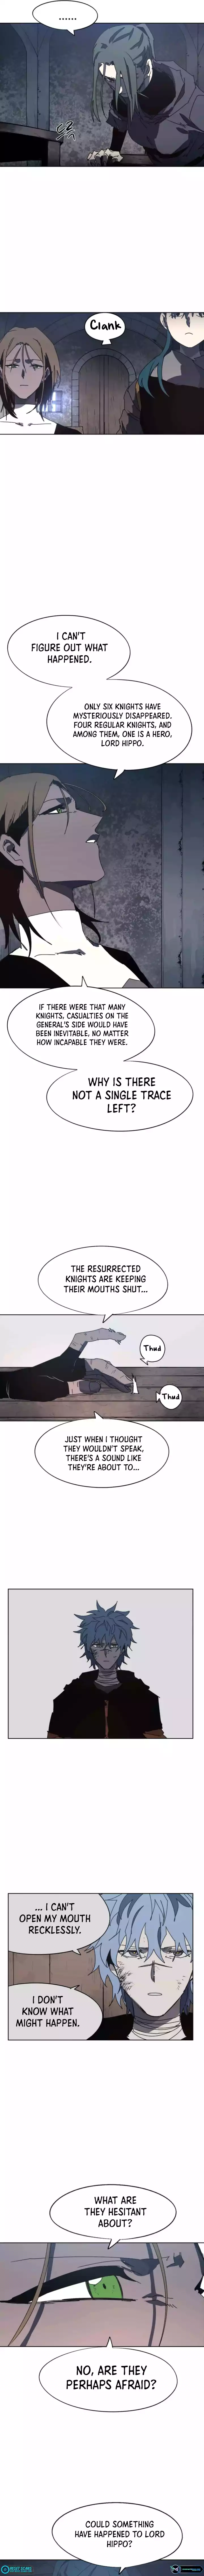 The Ember Knight - Page 2